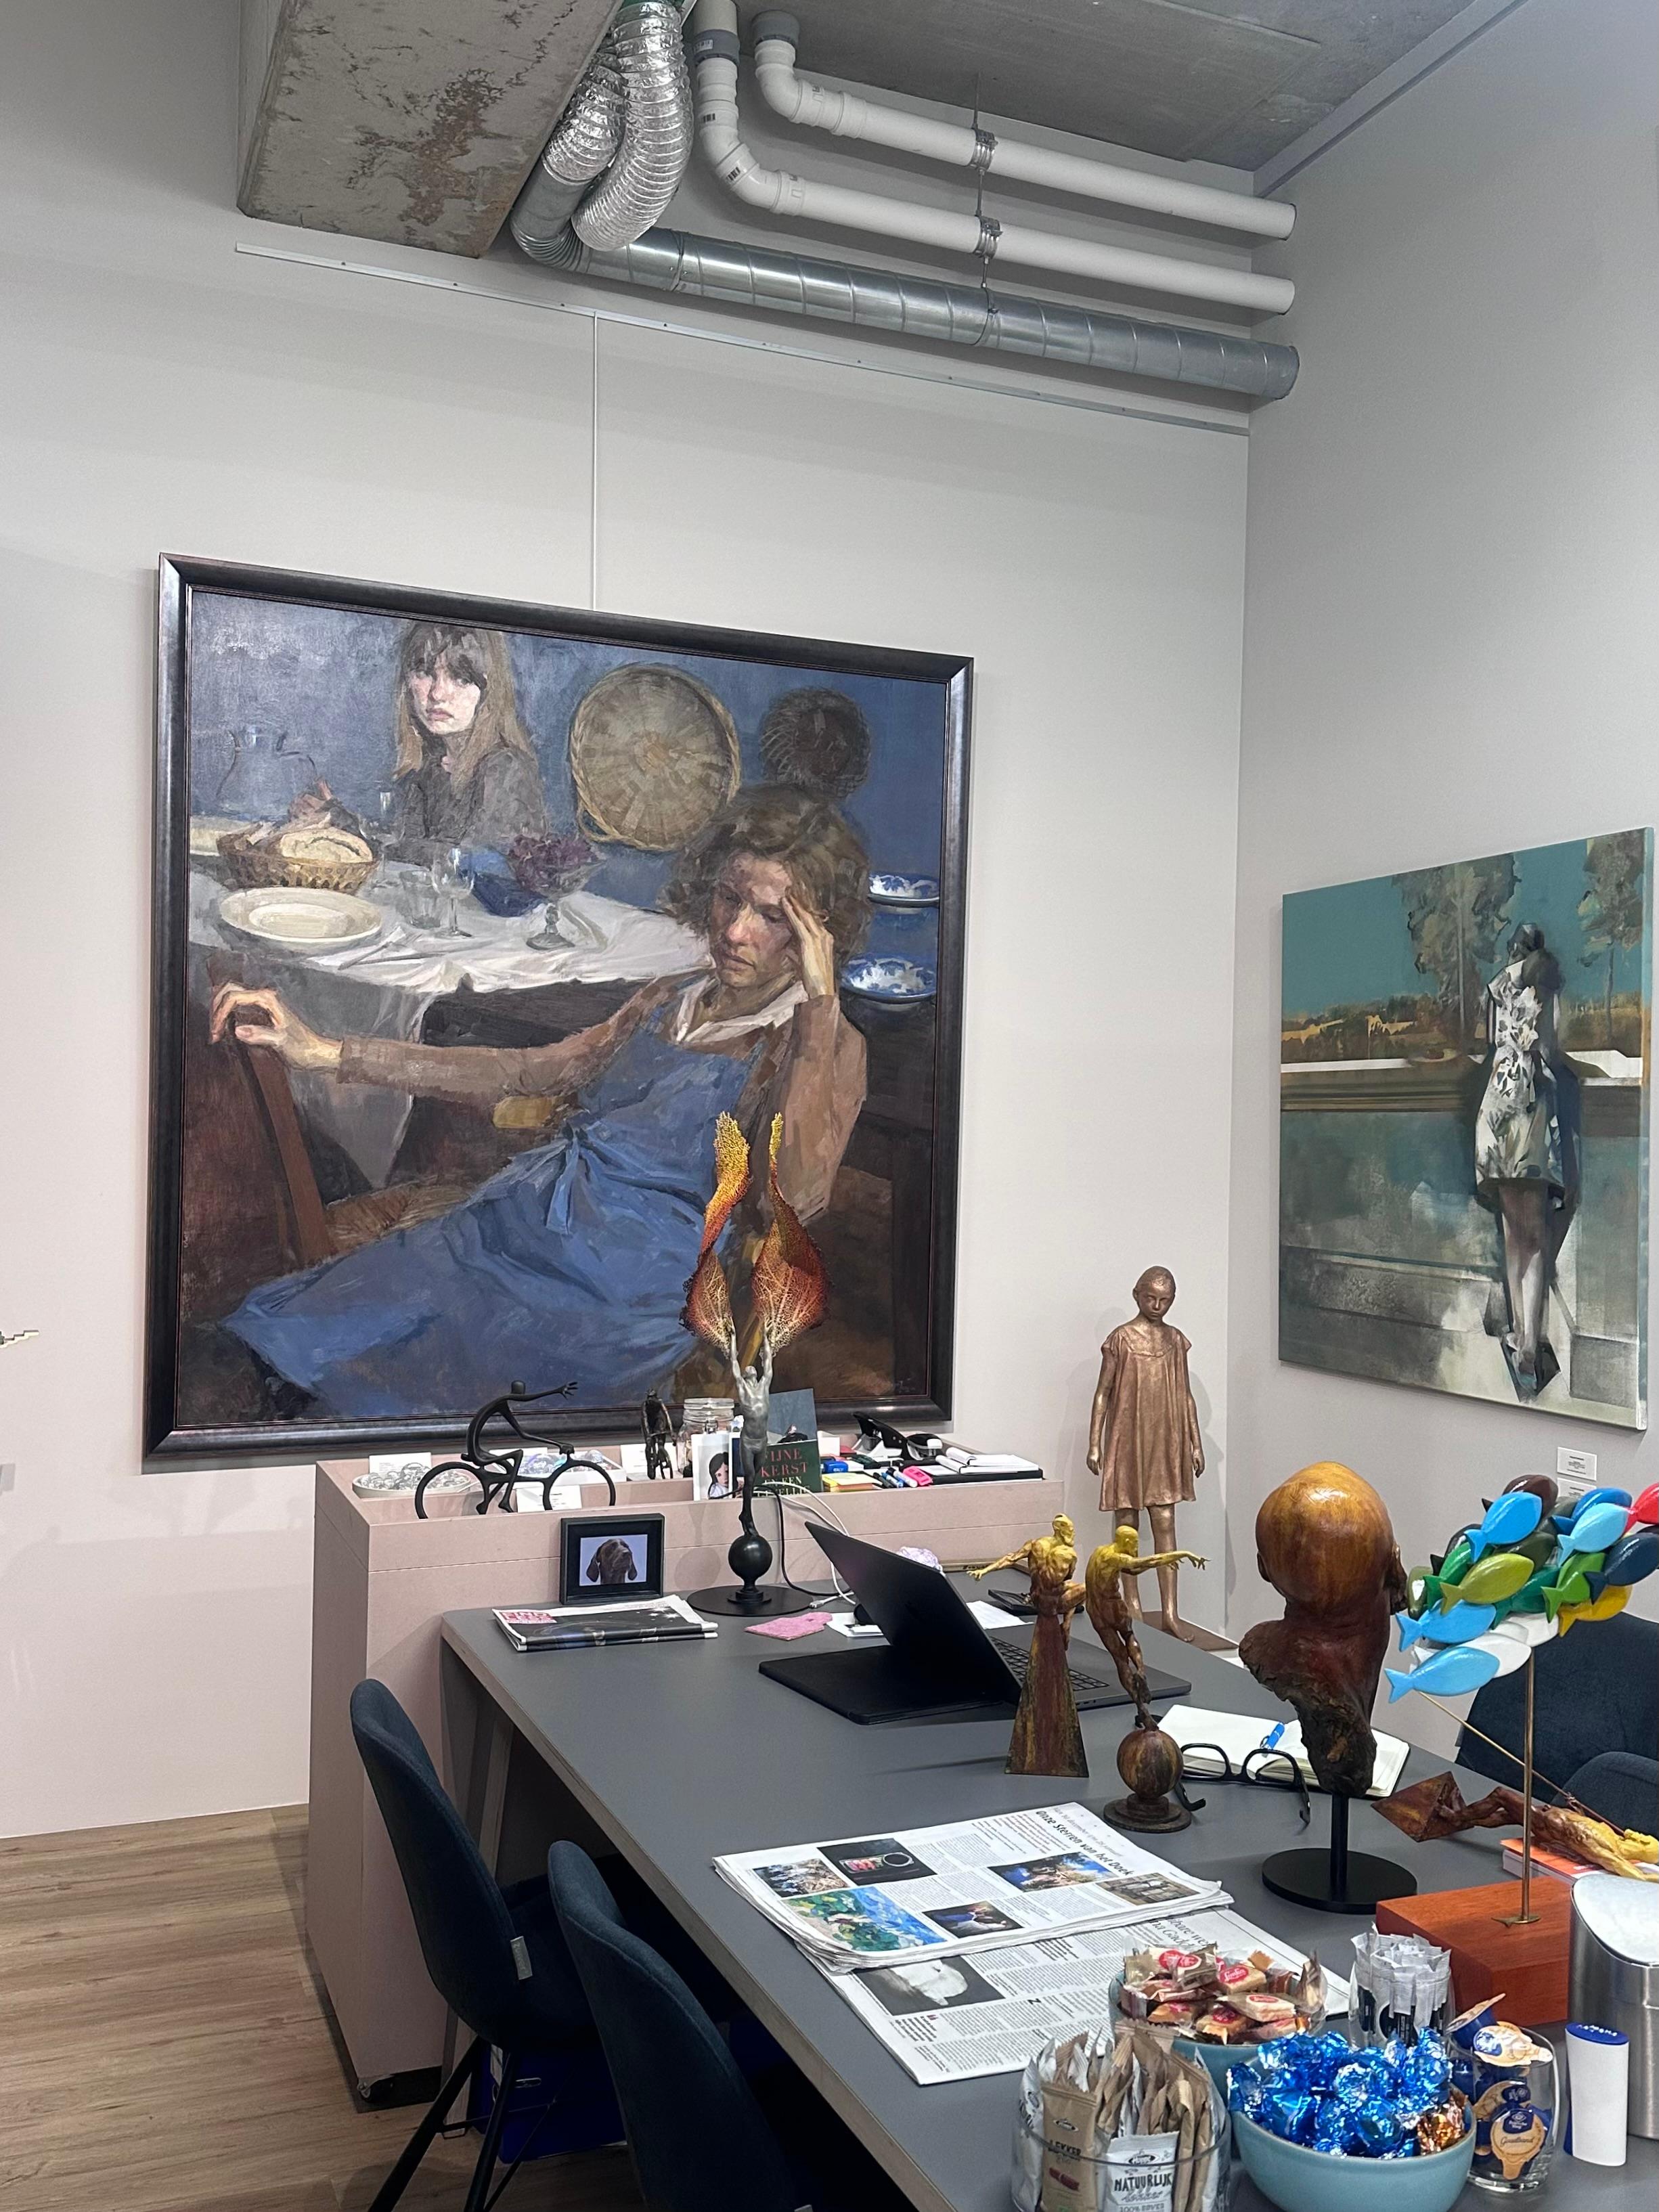 Anna Maria Vargiu
Had to tell you
180 x 180 cm
oil on canvas

Anna Maria Vargiu can be called a great talent with her just 30 years.

This paintings she made together with four other large canvasses. Together they tell stories about growing up,